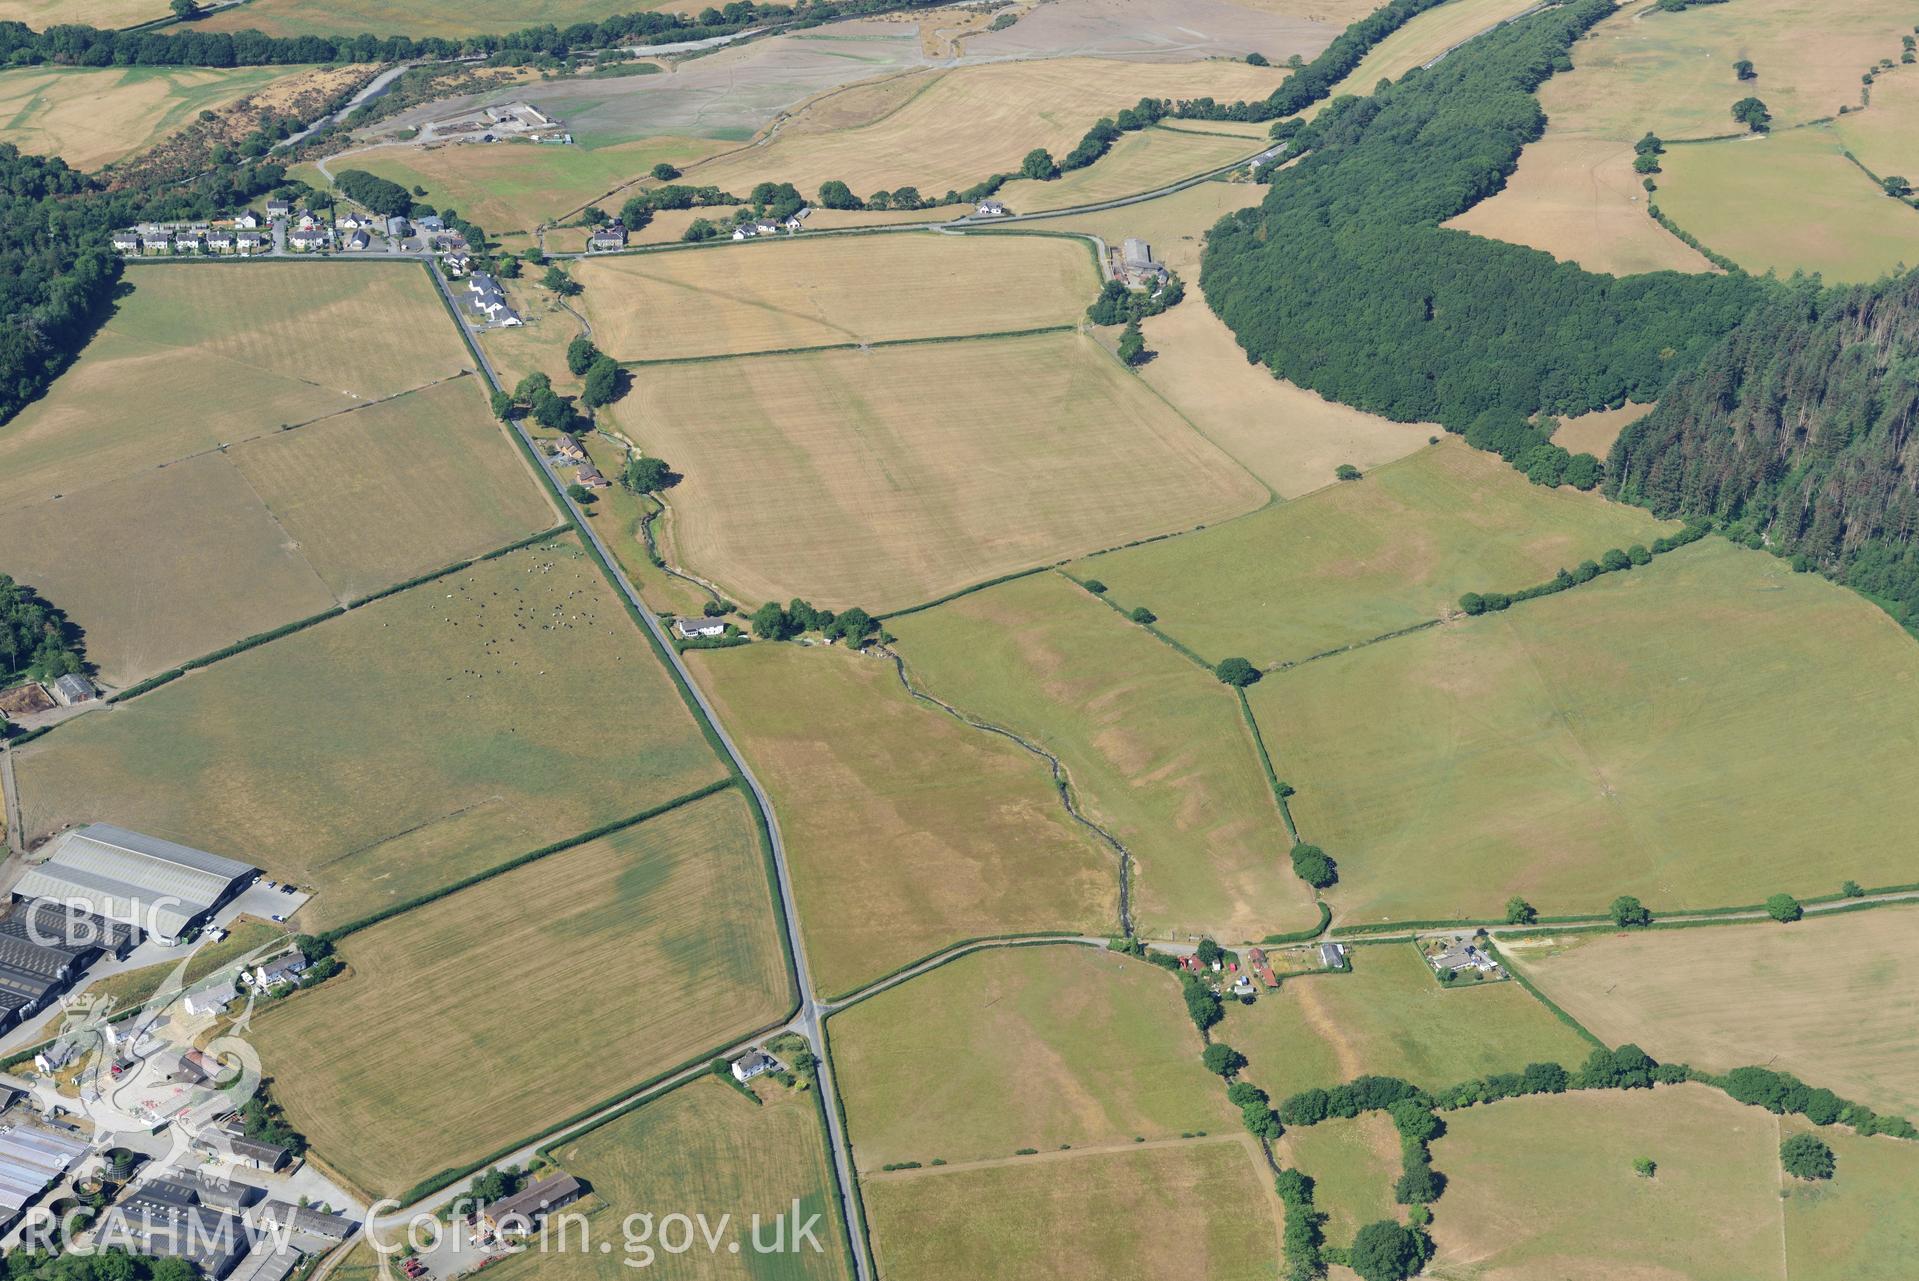 Royal Commission aerial photography of Abermagwr Roman villa landscape taken on 19th July 2018 during the 2018 drought.